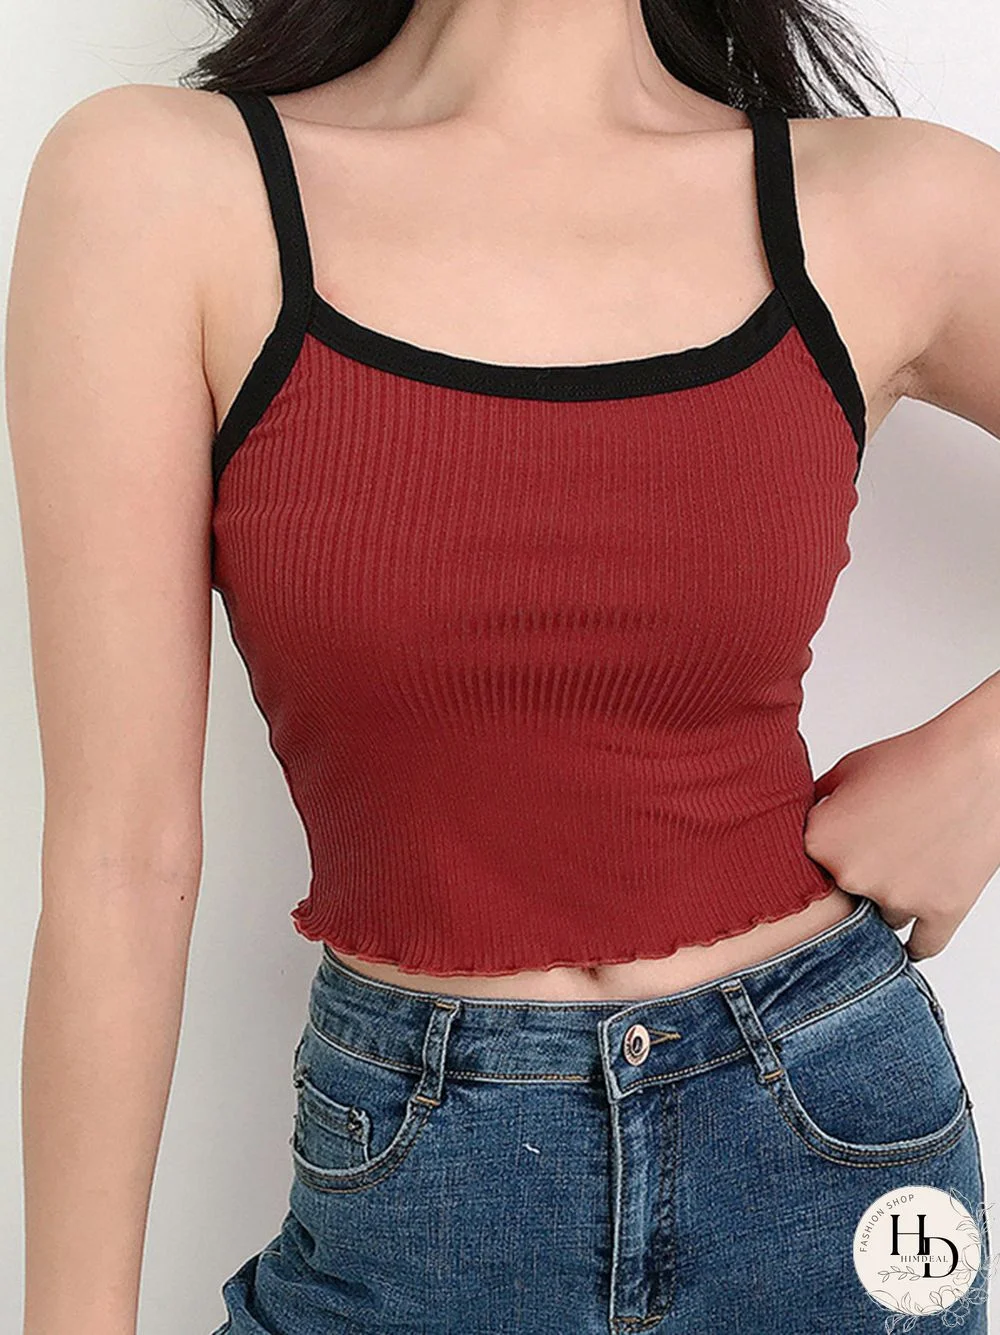 Summer New Fashion Contrast Color Tank Top Women Casual Fitness Clothing Off Shoulder Strapless Crop Top Camisole